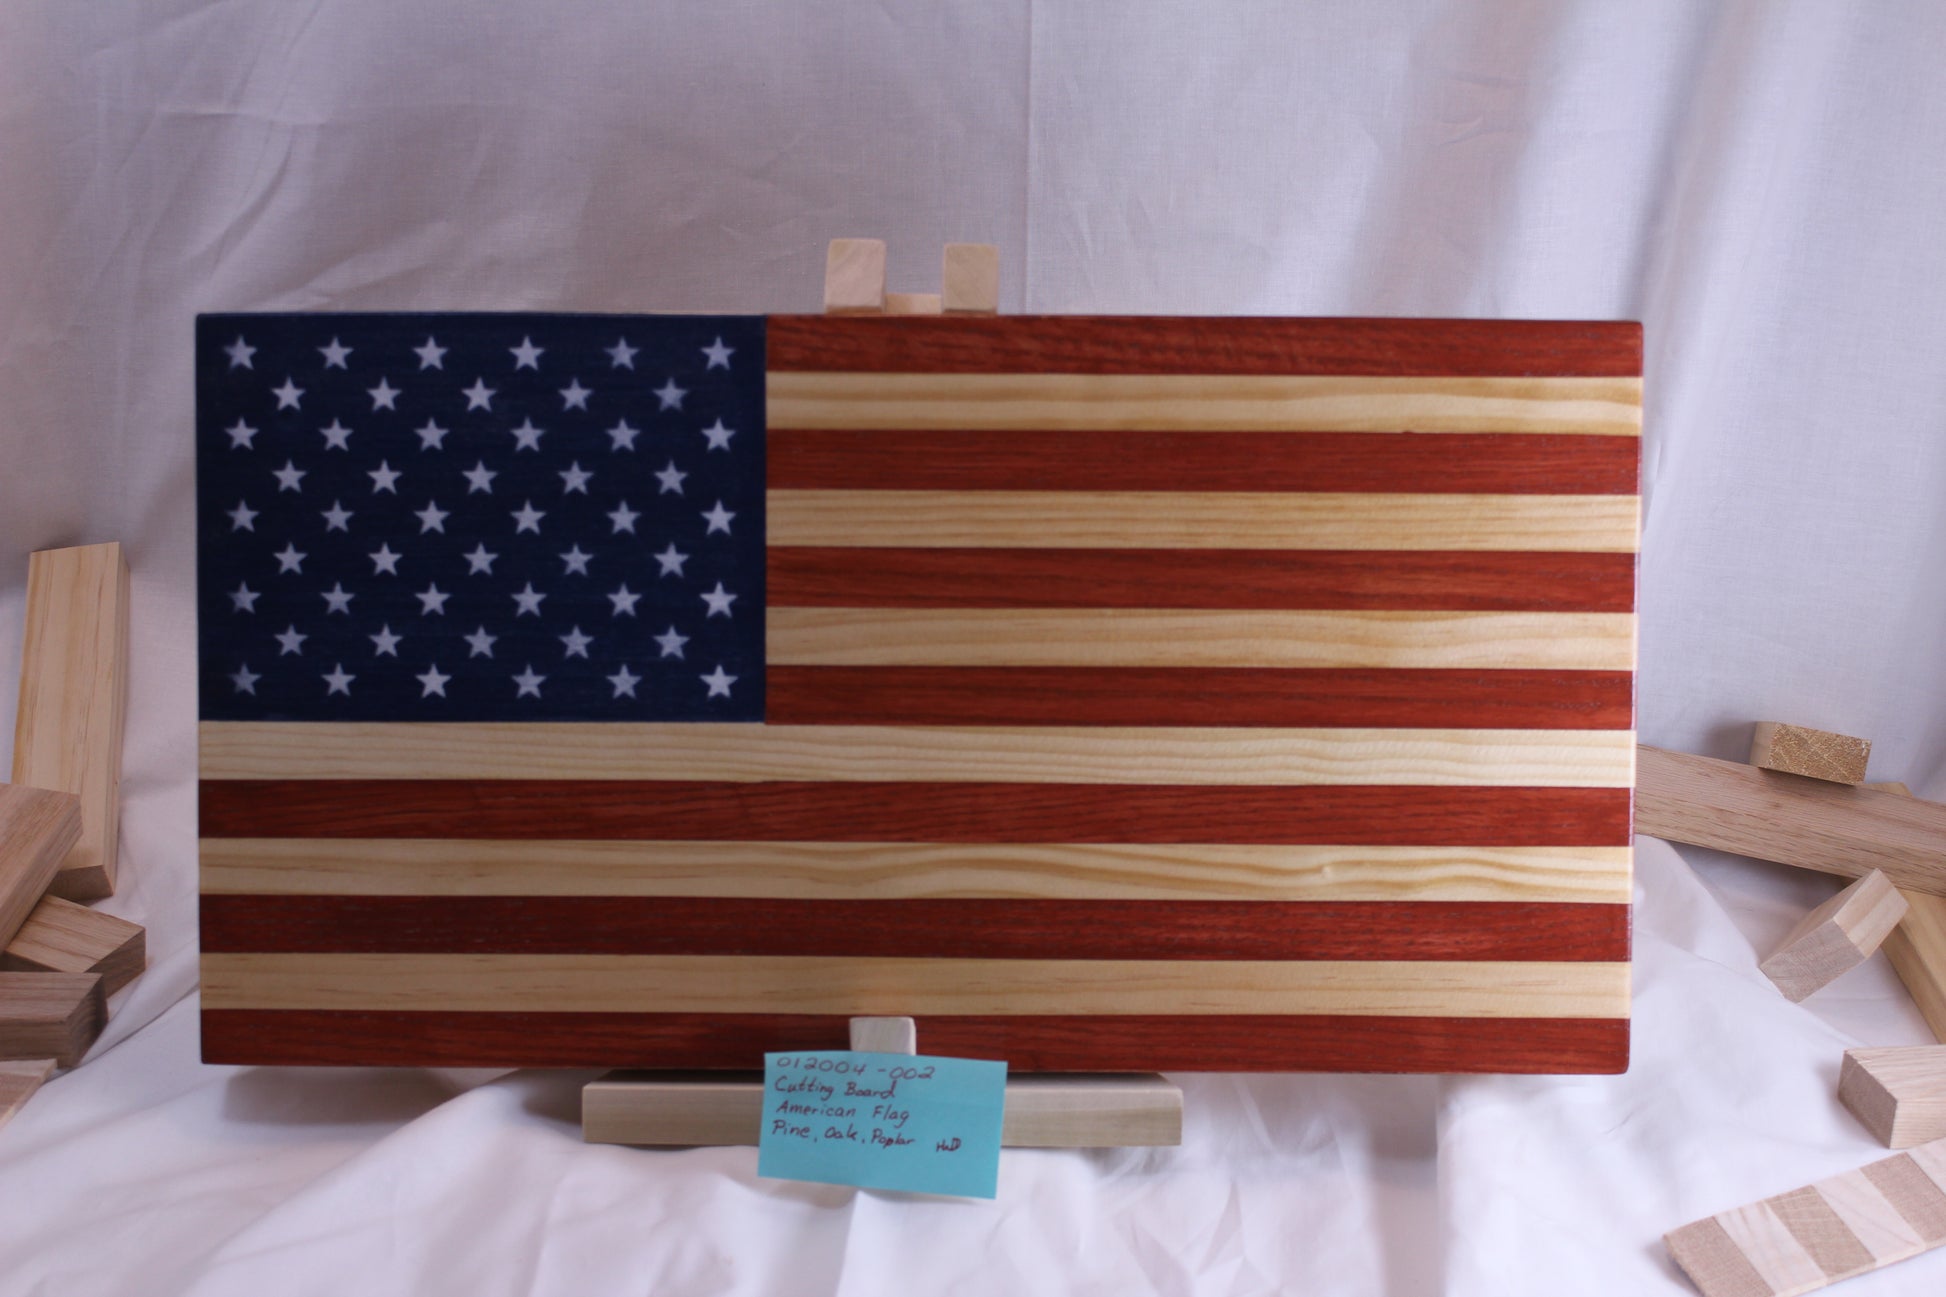 Front - American flag is colored with non-toxic water based stain allowing you to still see the beautiful wood grain. It has been coated with a food contact safe sealer.  